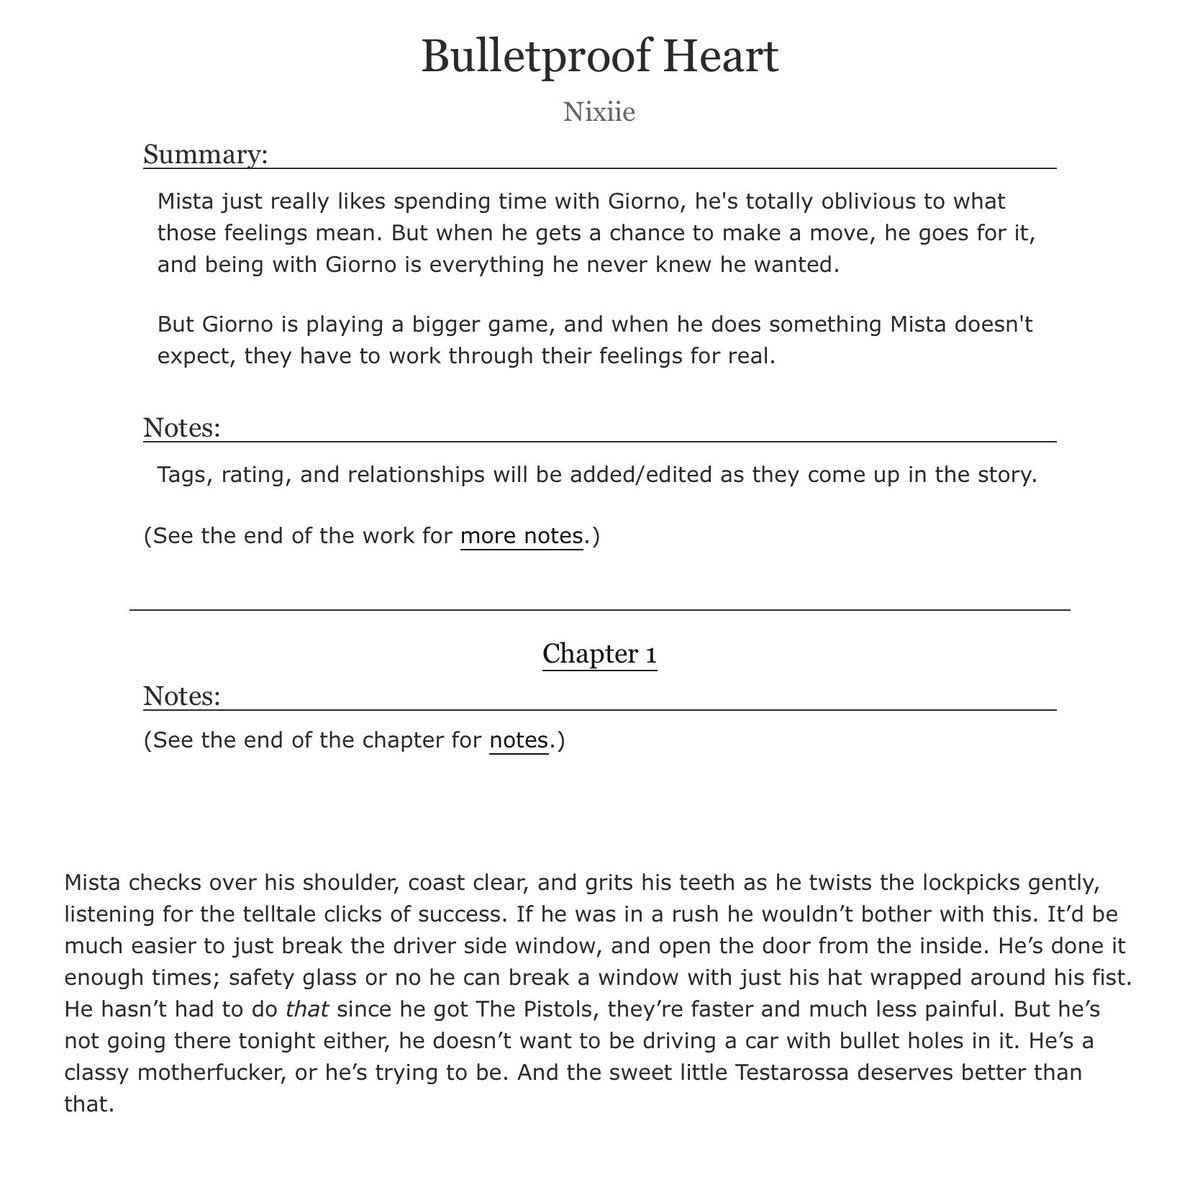 It is time for an #ExtraKudos thread! Let's start with Bulletproof Heart by @NixiieNoiz . I've read this fic many times and it always manages to break my heart. The characters feel real, vulnerable - making so many mistakes over the course of their relationship. 